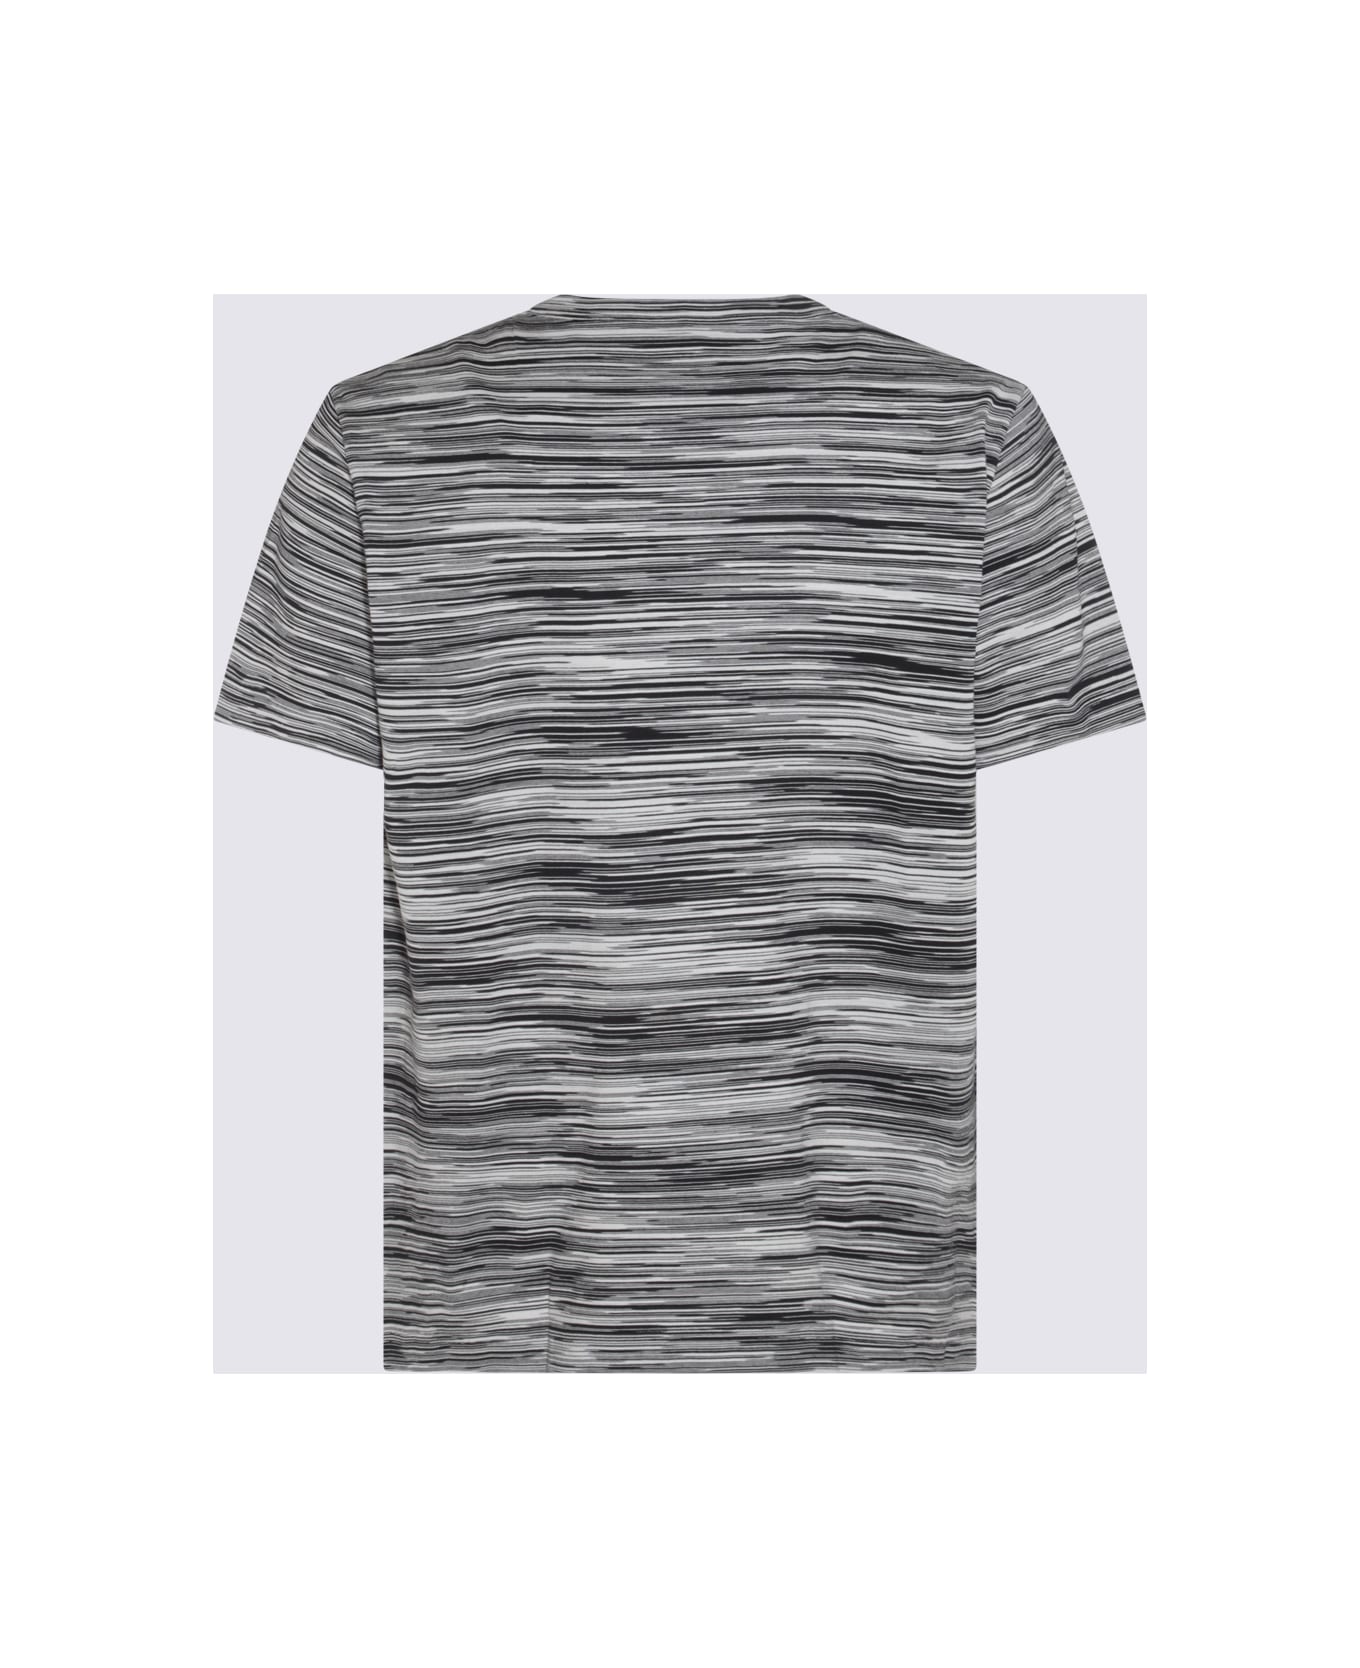 Missoni Multicolor Cotton T-shirt - SPACE DYED BLACK AND WHITE